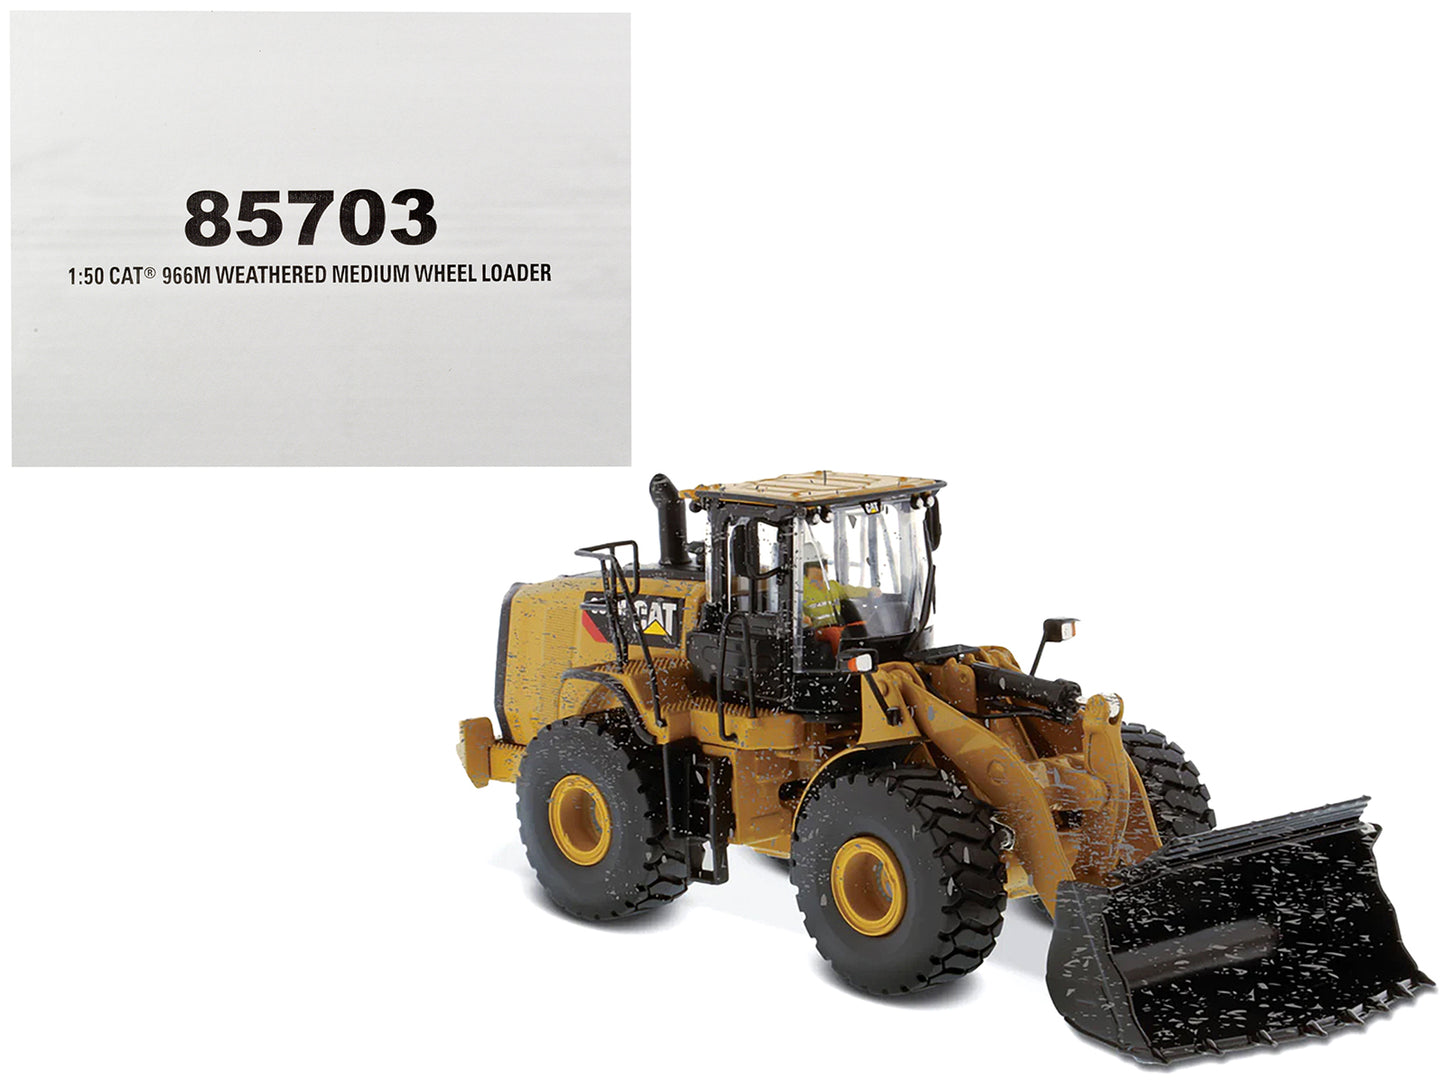 cat 966m loader dirty weathered 1/50 diecast model